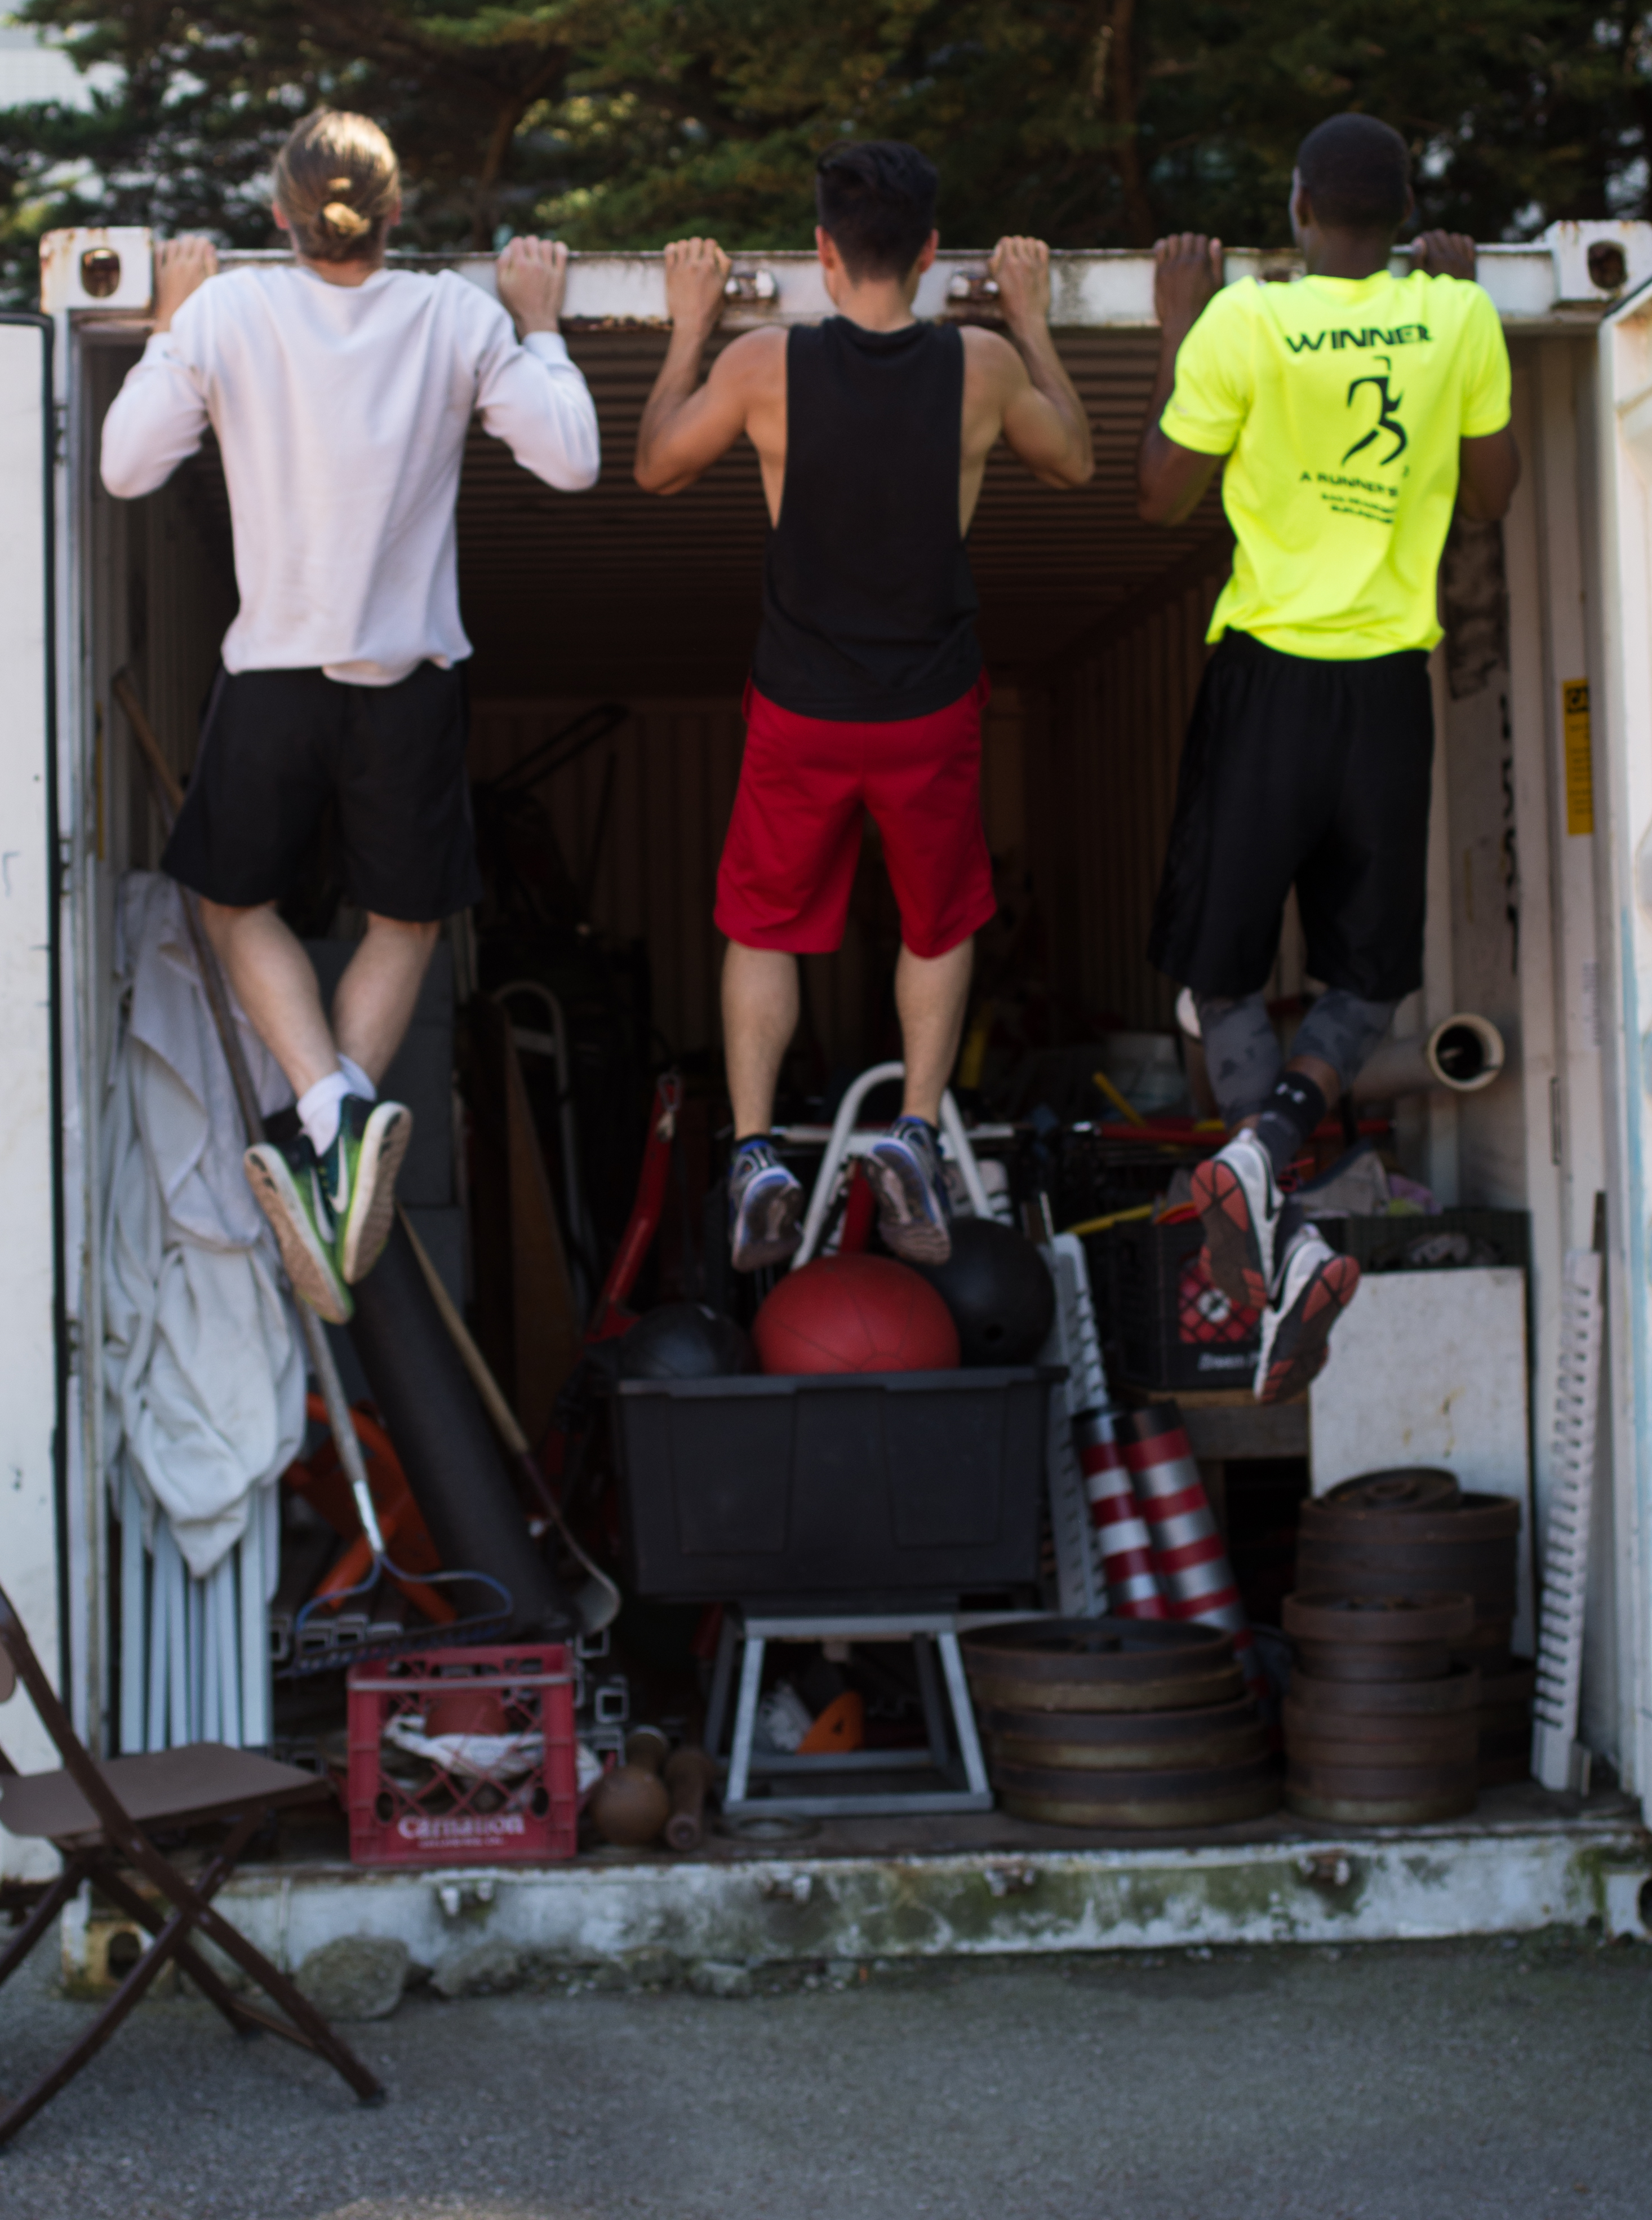 Rams track athletes Ronan Sullivan, Anthony Ismail and Rodney Morgan (left to right) do pull-ups using the edge of an equipment shed in the corner of the track field on May 1, 2017. (Nancy Chan / The Guardsman) 